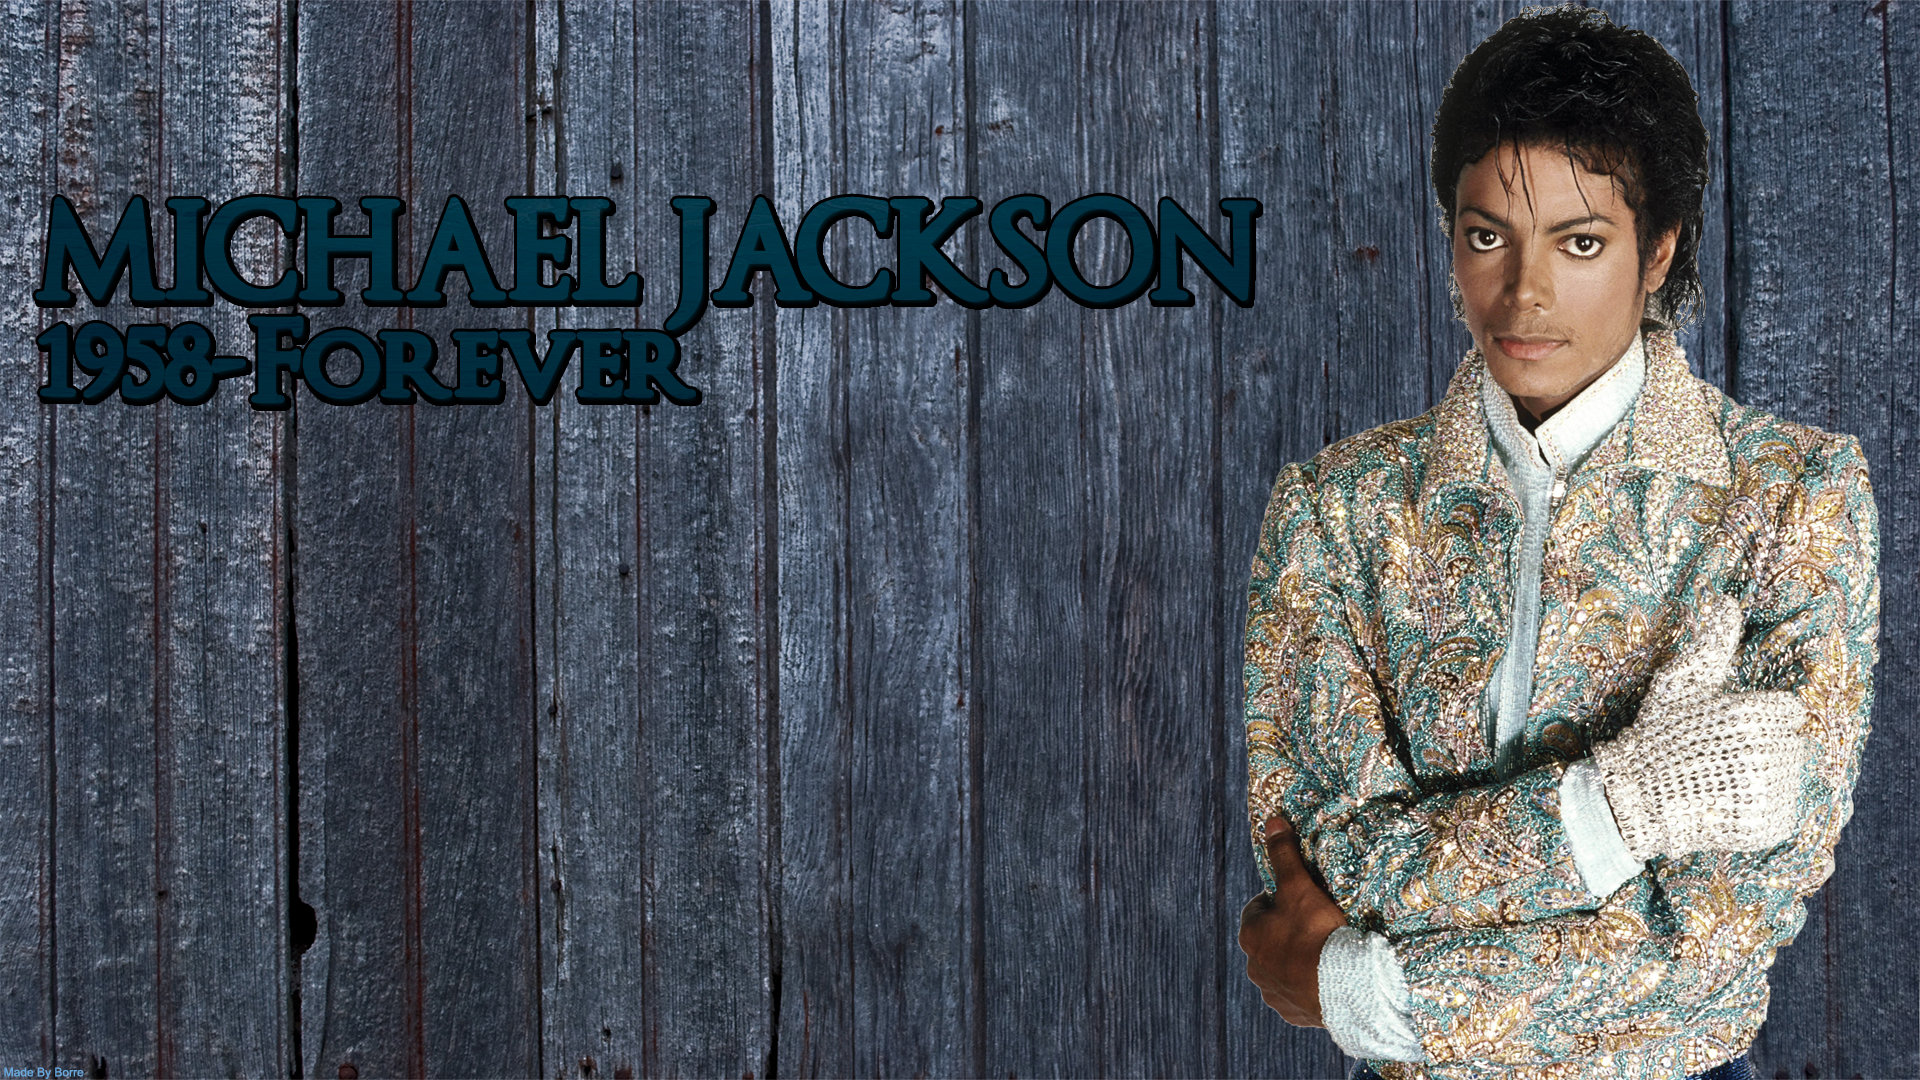 Download full hd 1080p Michael Jackson desktop background ID:98821 for free